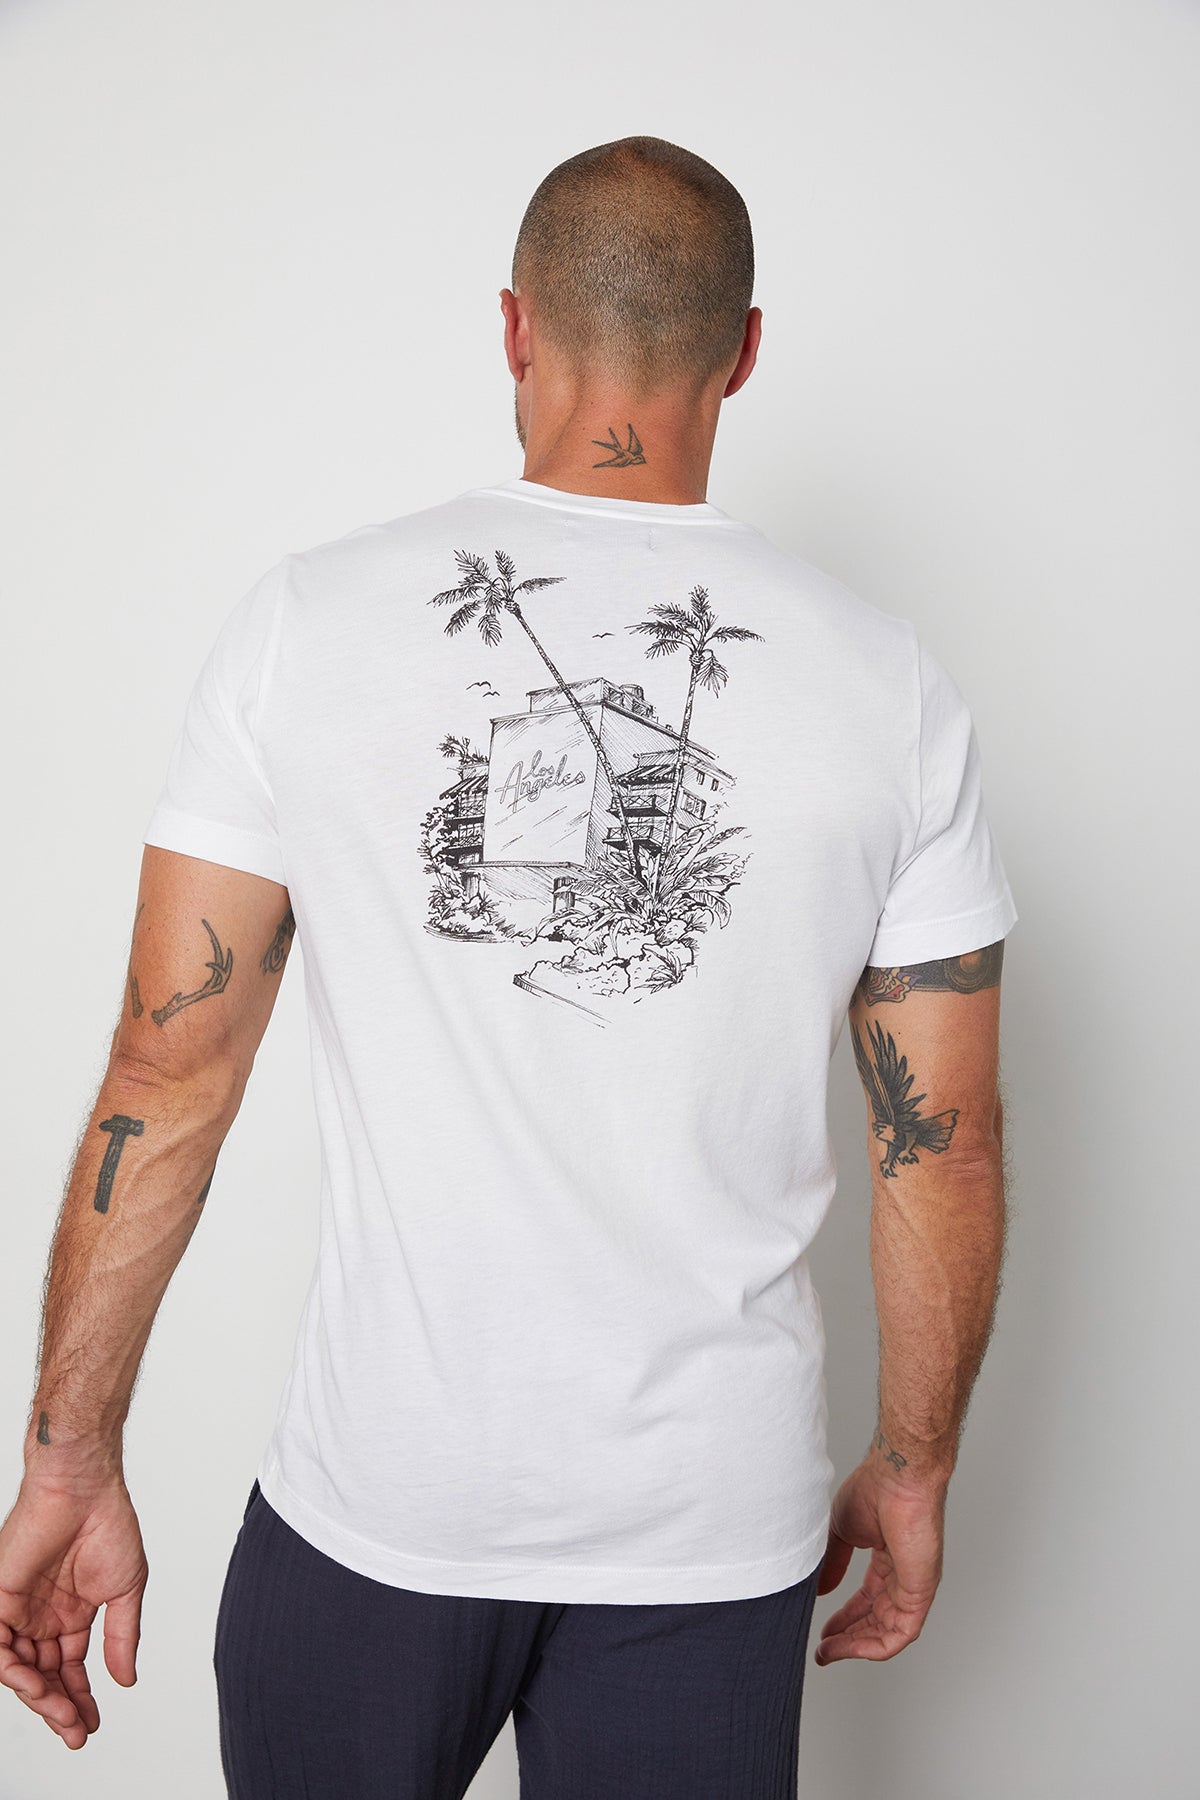 Back view of white Angelo crew neck tee with black sketch graphic on back representing Los Angeles with building and palm trees.-24605755015361